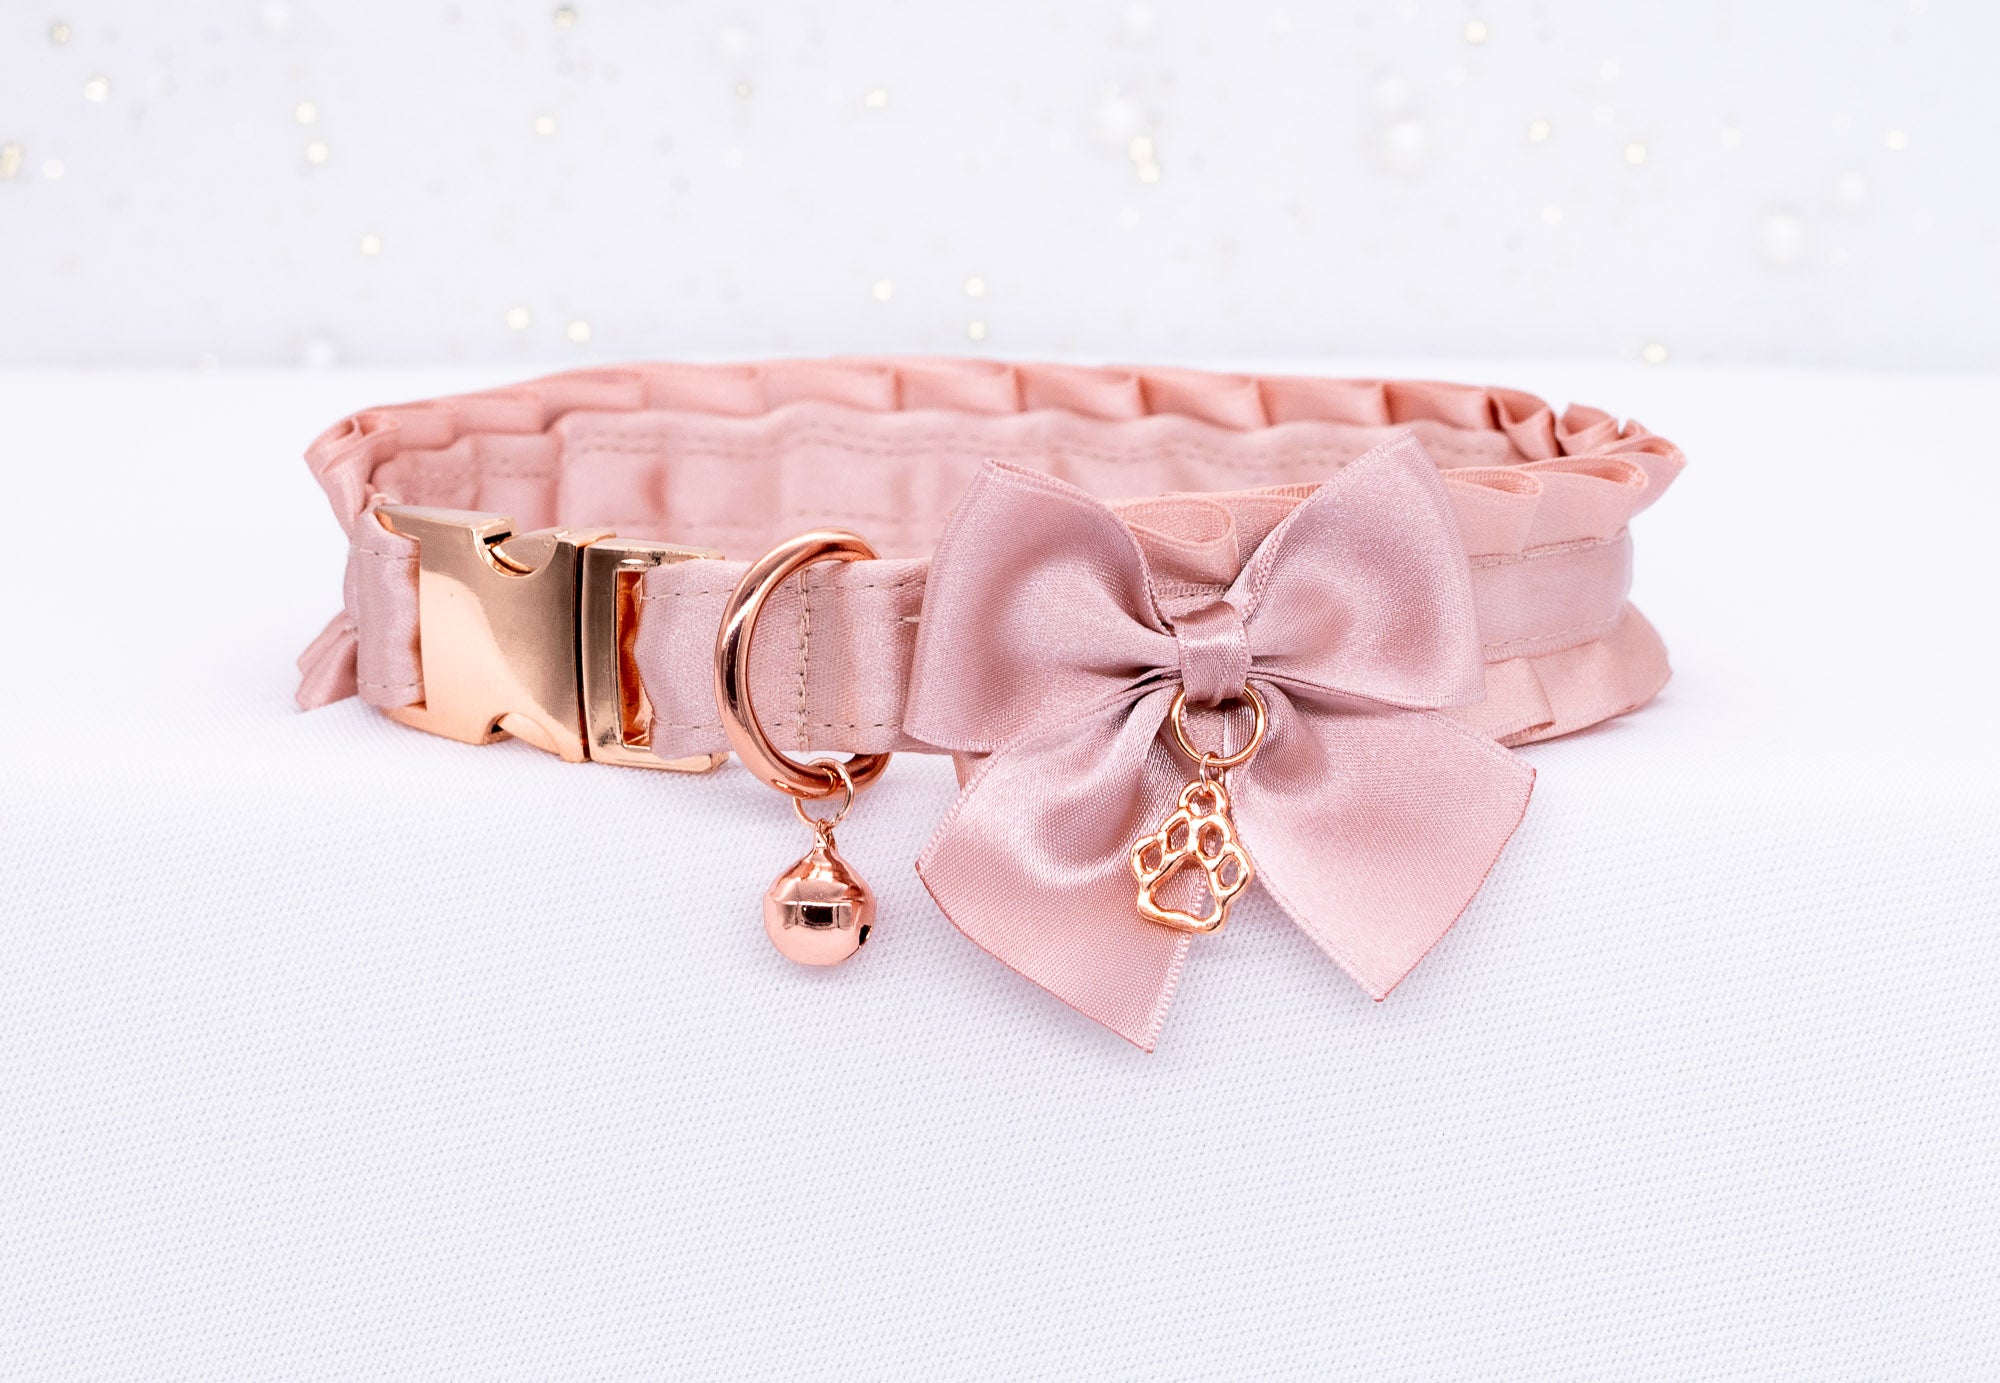 Snap Buckle Puppy Style BDSM Collar in Rose Gold